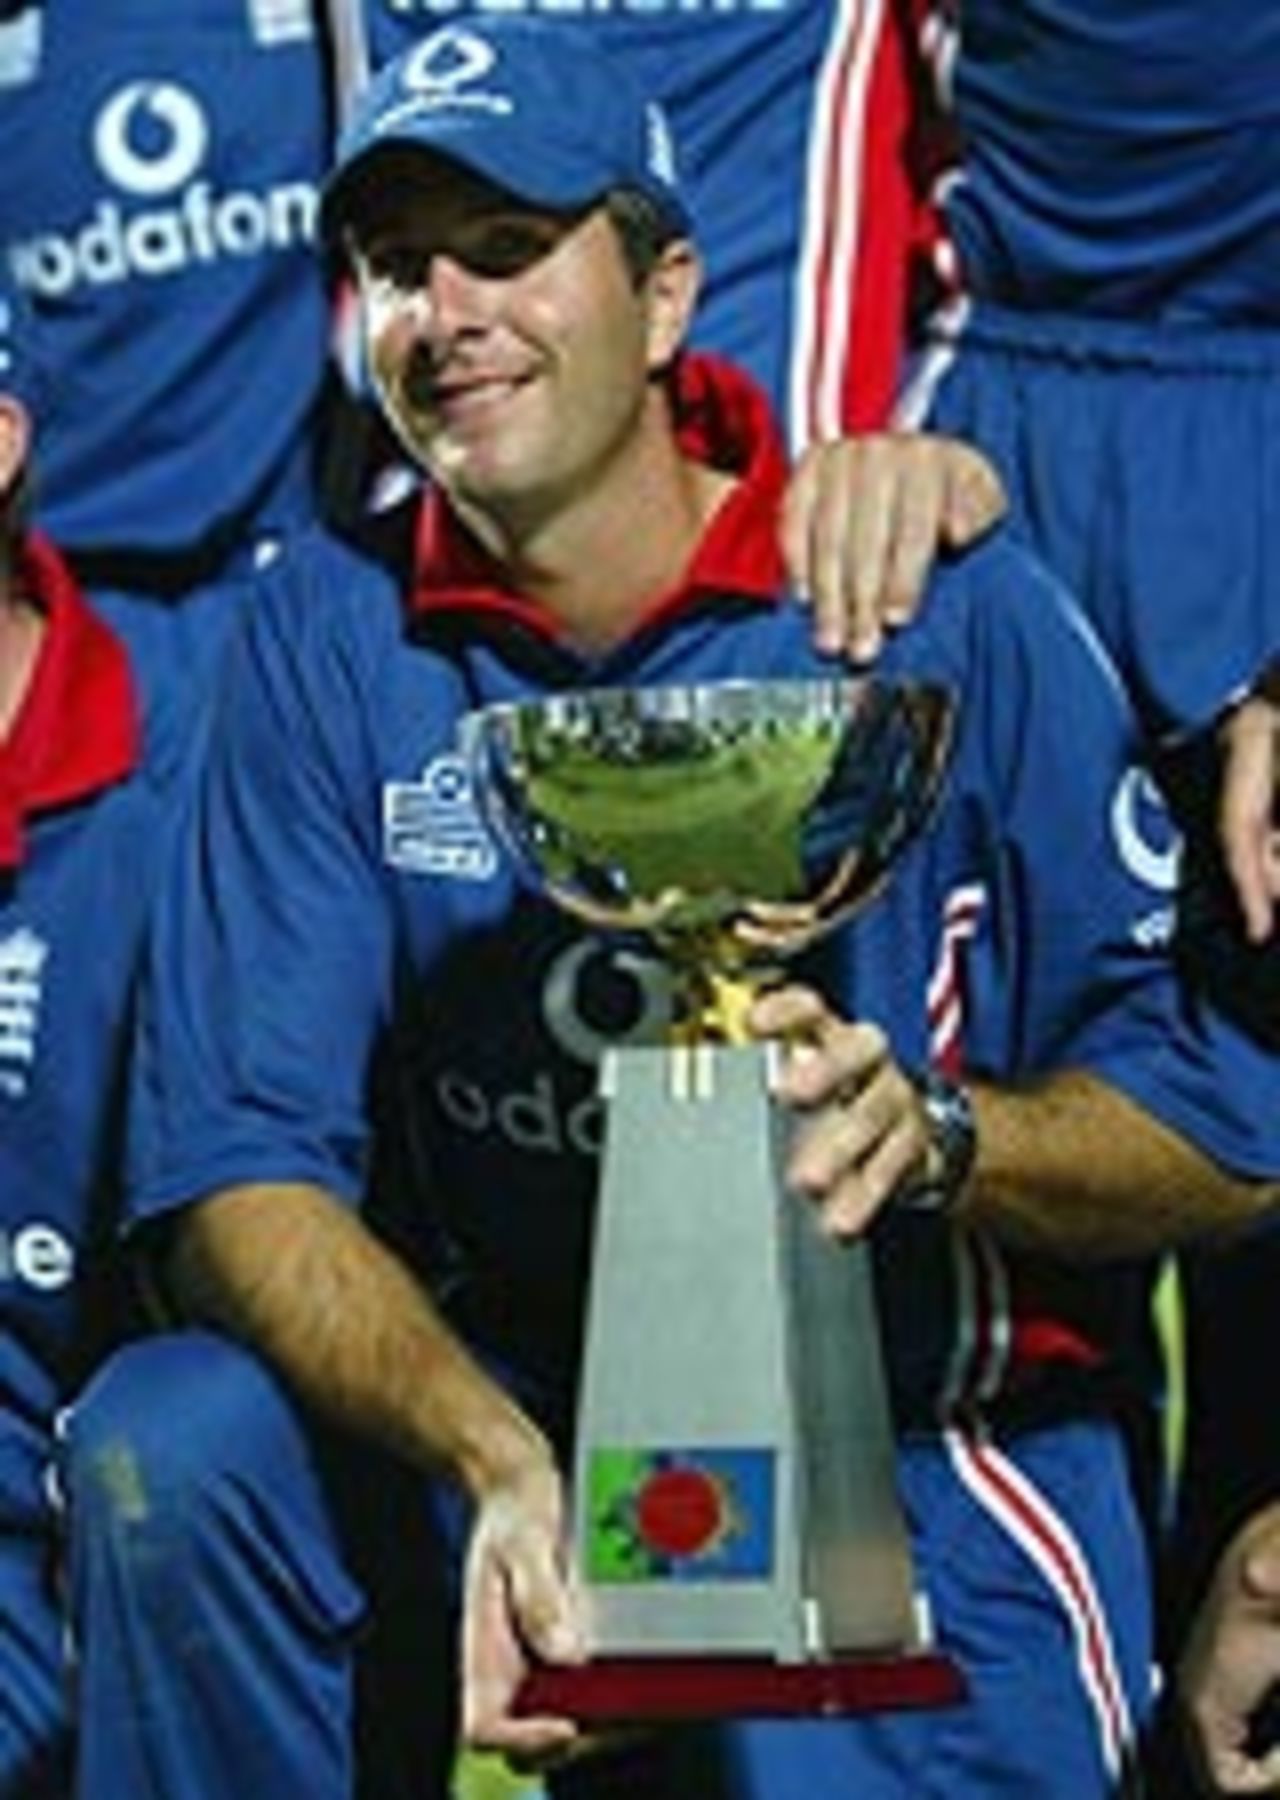 Michael Vaughan collects another trophy after beating Bangladesh